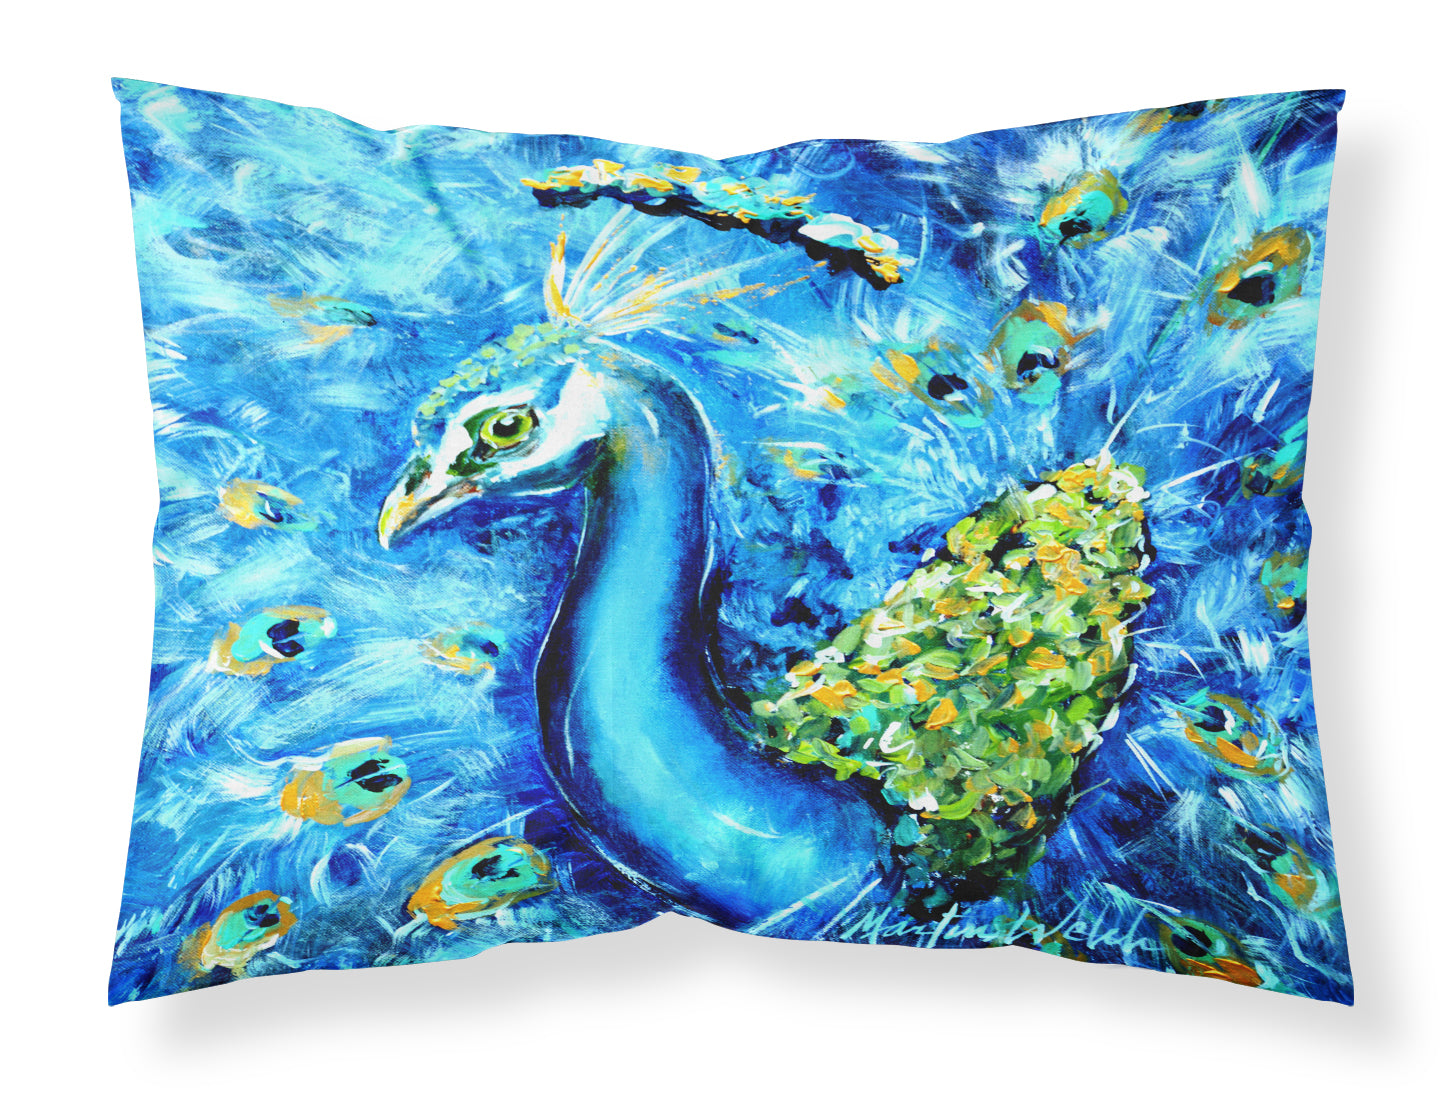 Buy this Peacock Straight Up in Blue Fabric Standard Pillowcase